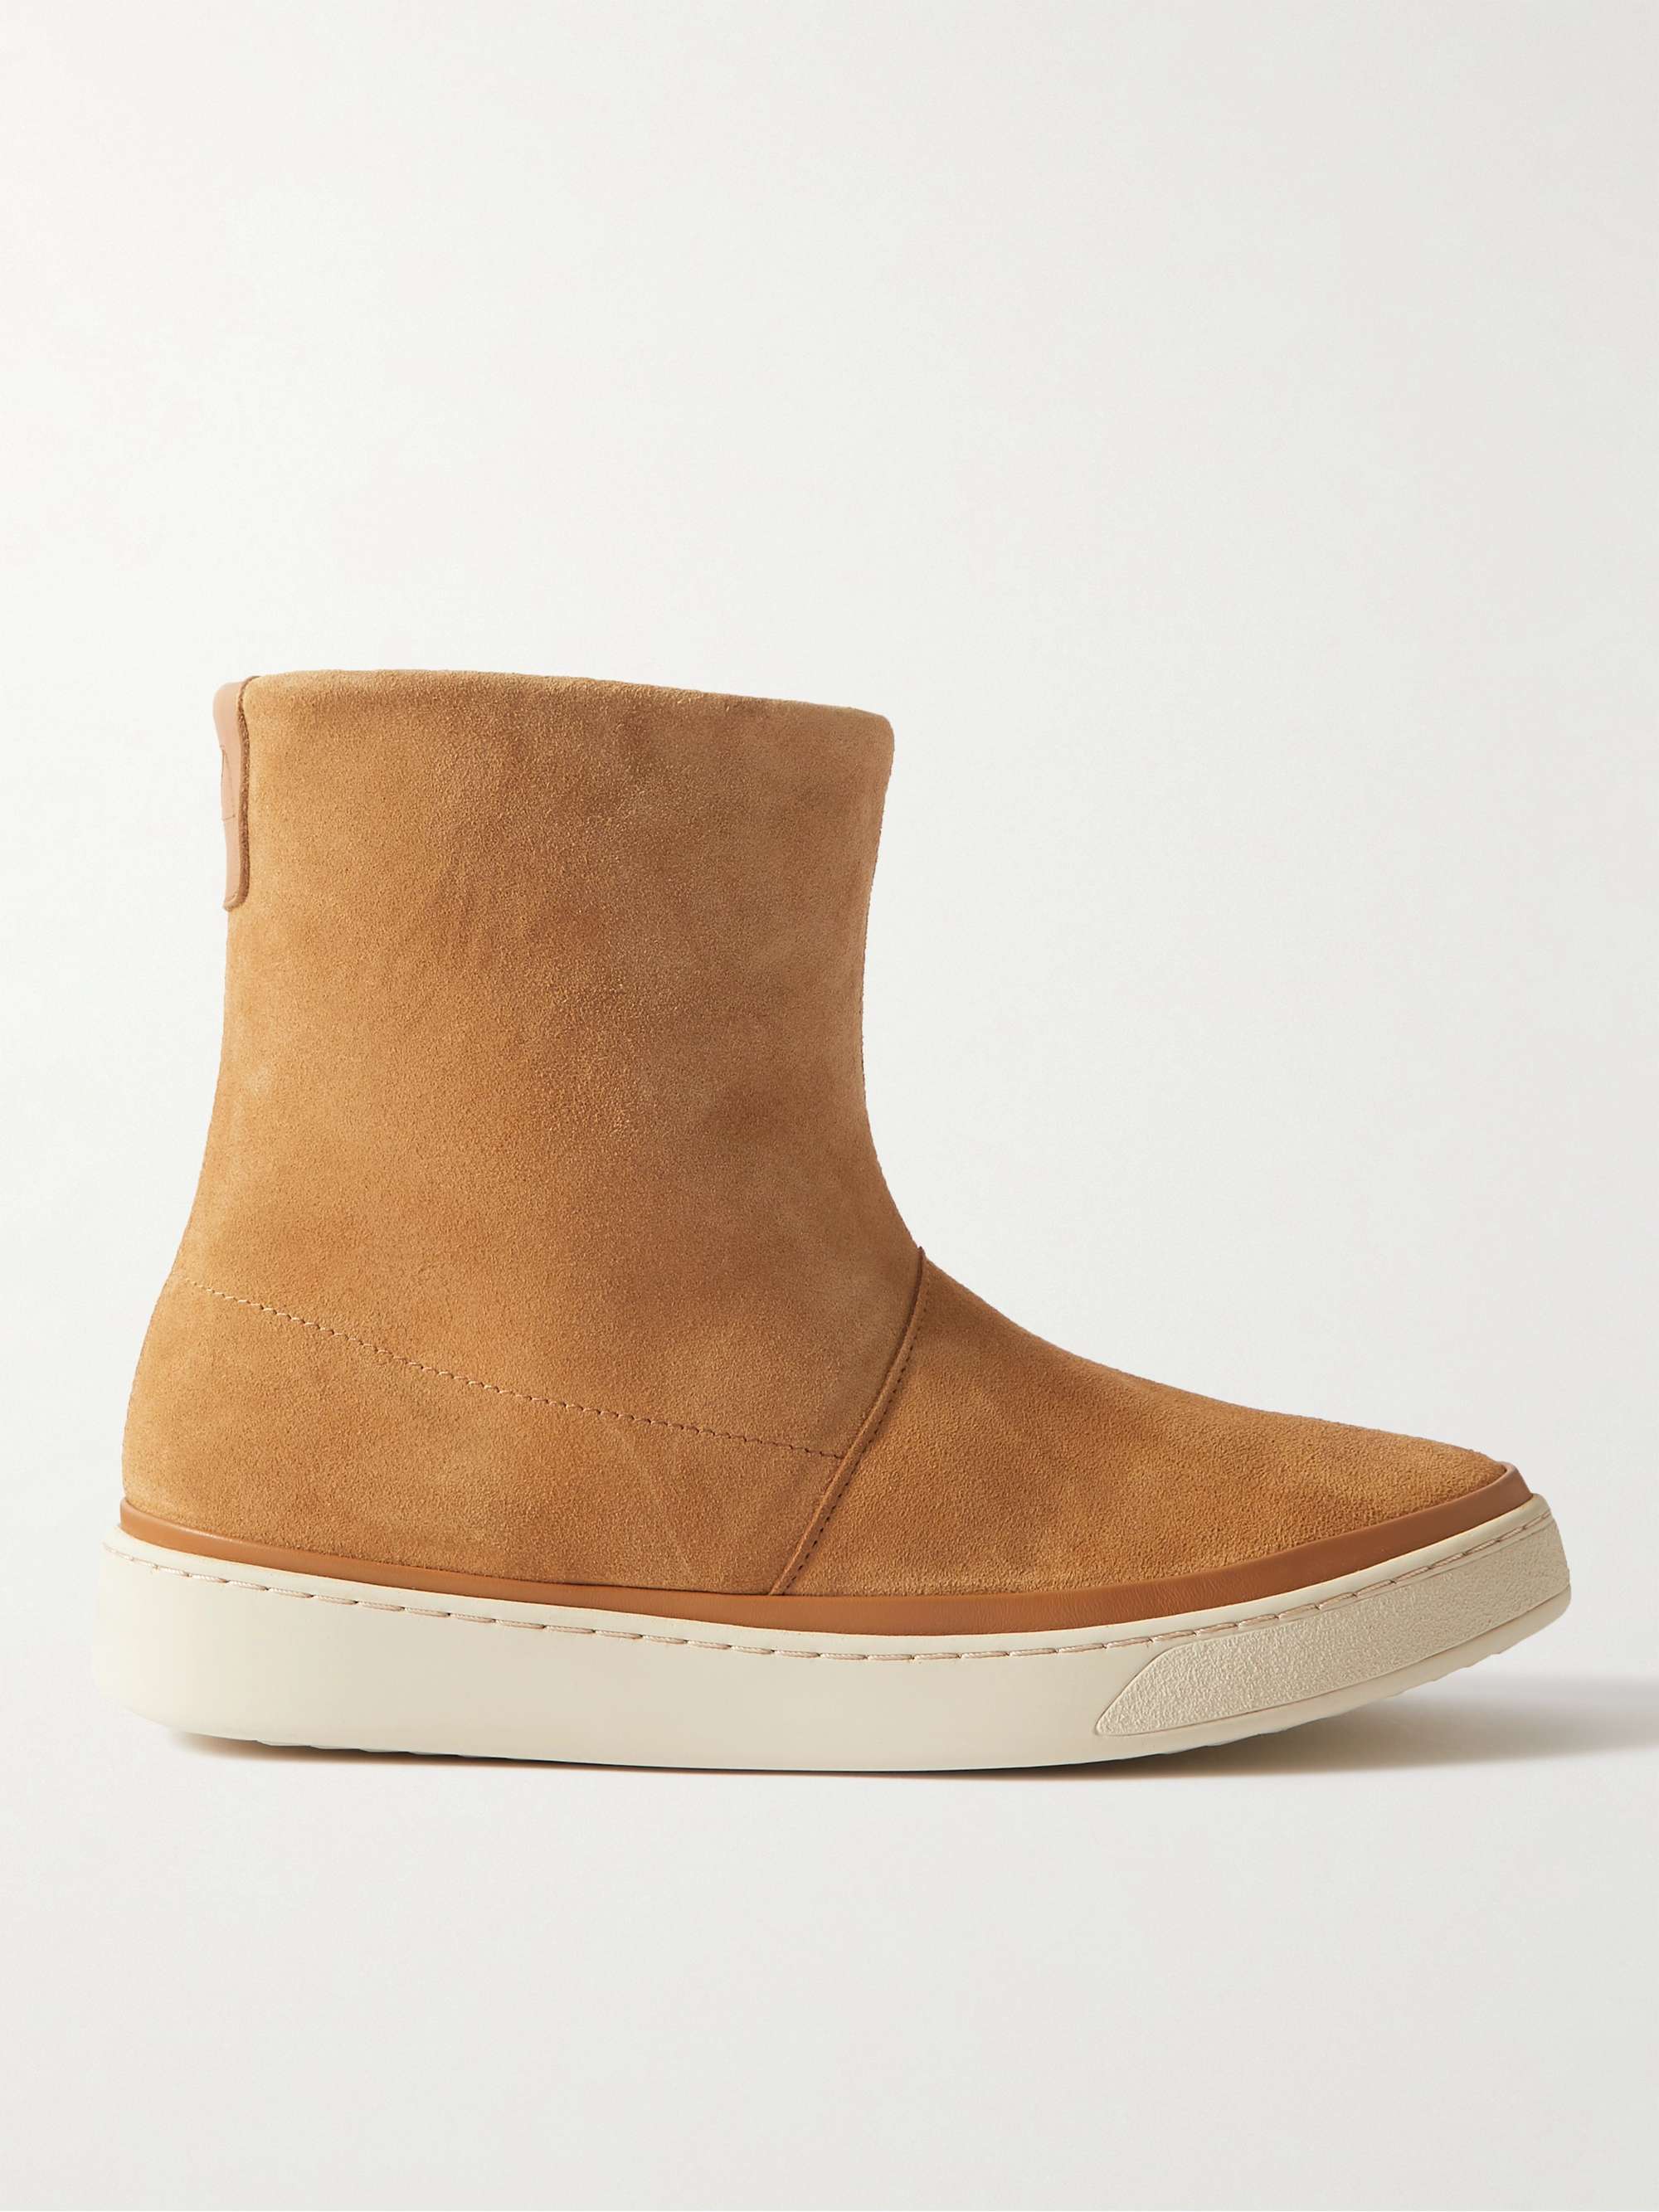 MULO Shearling-Lined Waxed-Suede Ankle Boots